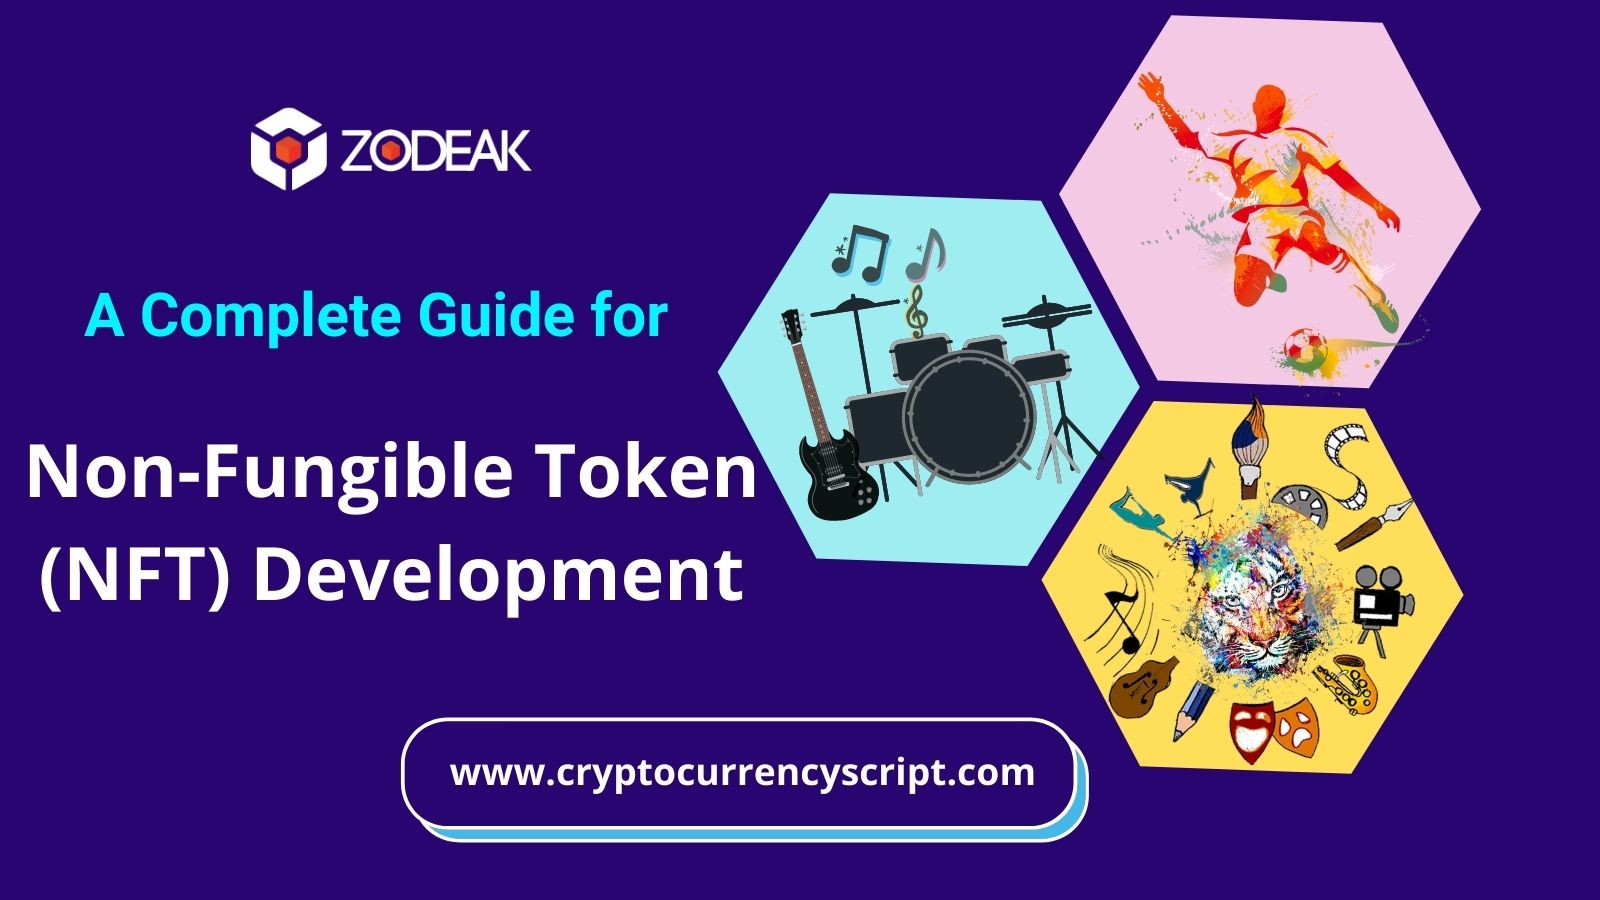 A Complete Guide for Non-Fungible Token (NFT) Development